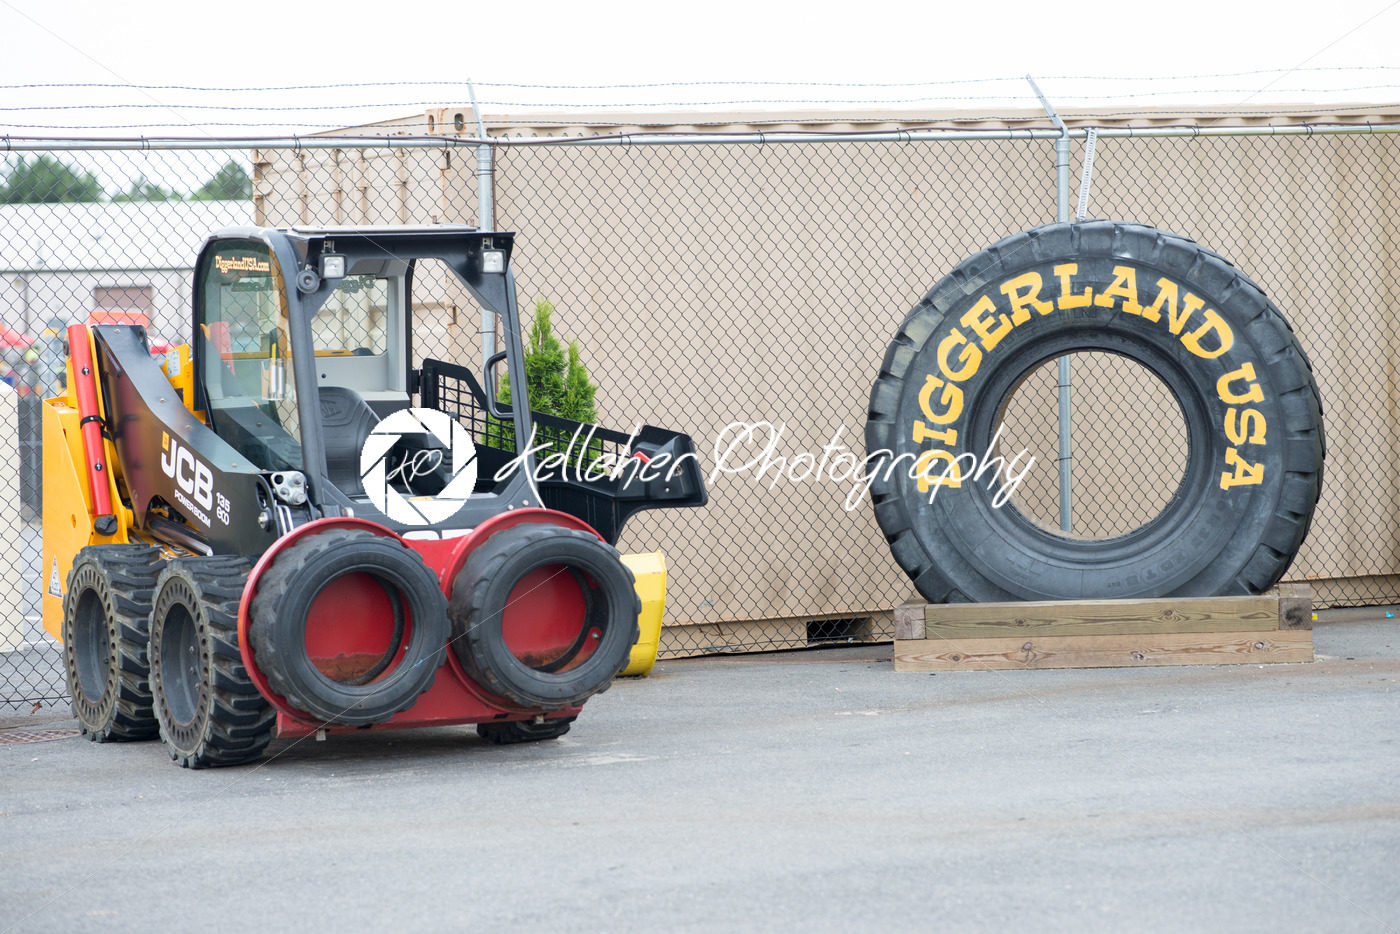 WEST BERLIN, NJ – MAY 28: Diggerland USA, the only construction themed adventure park in North America where children and families can operate actual machinery on May 28, 2017 - Kelleher Photography Store